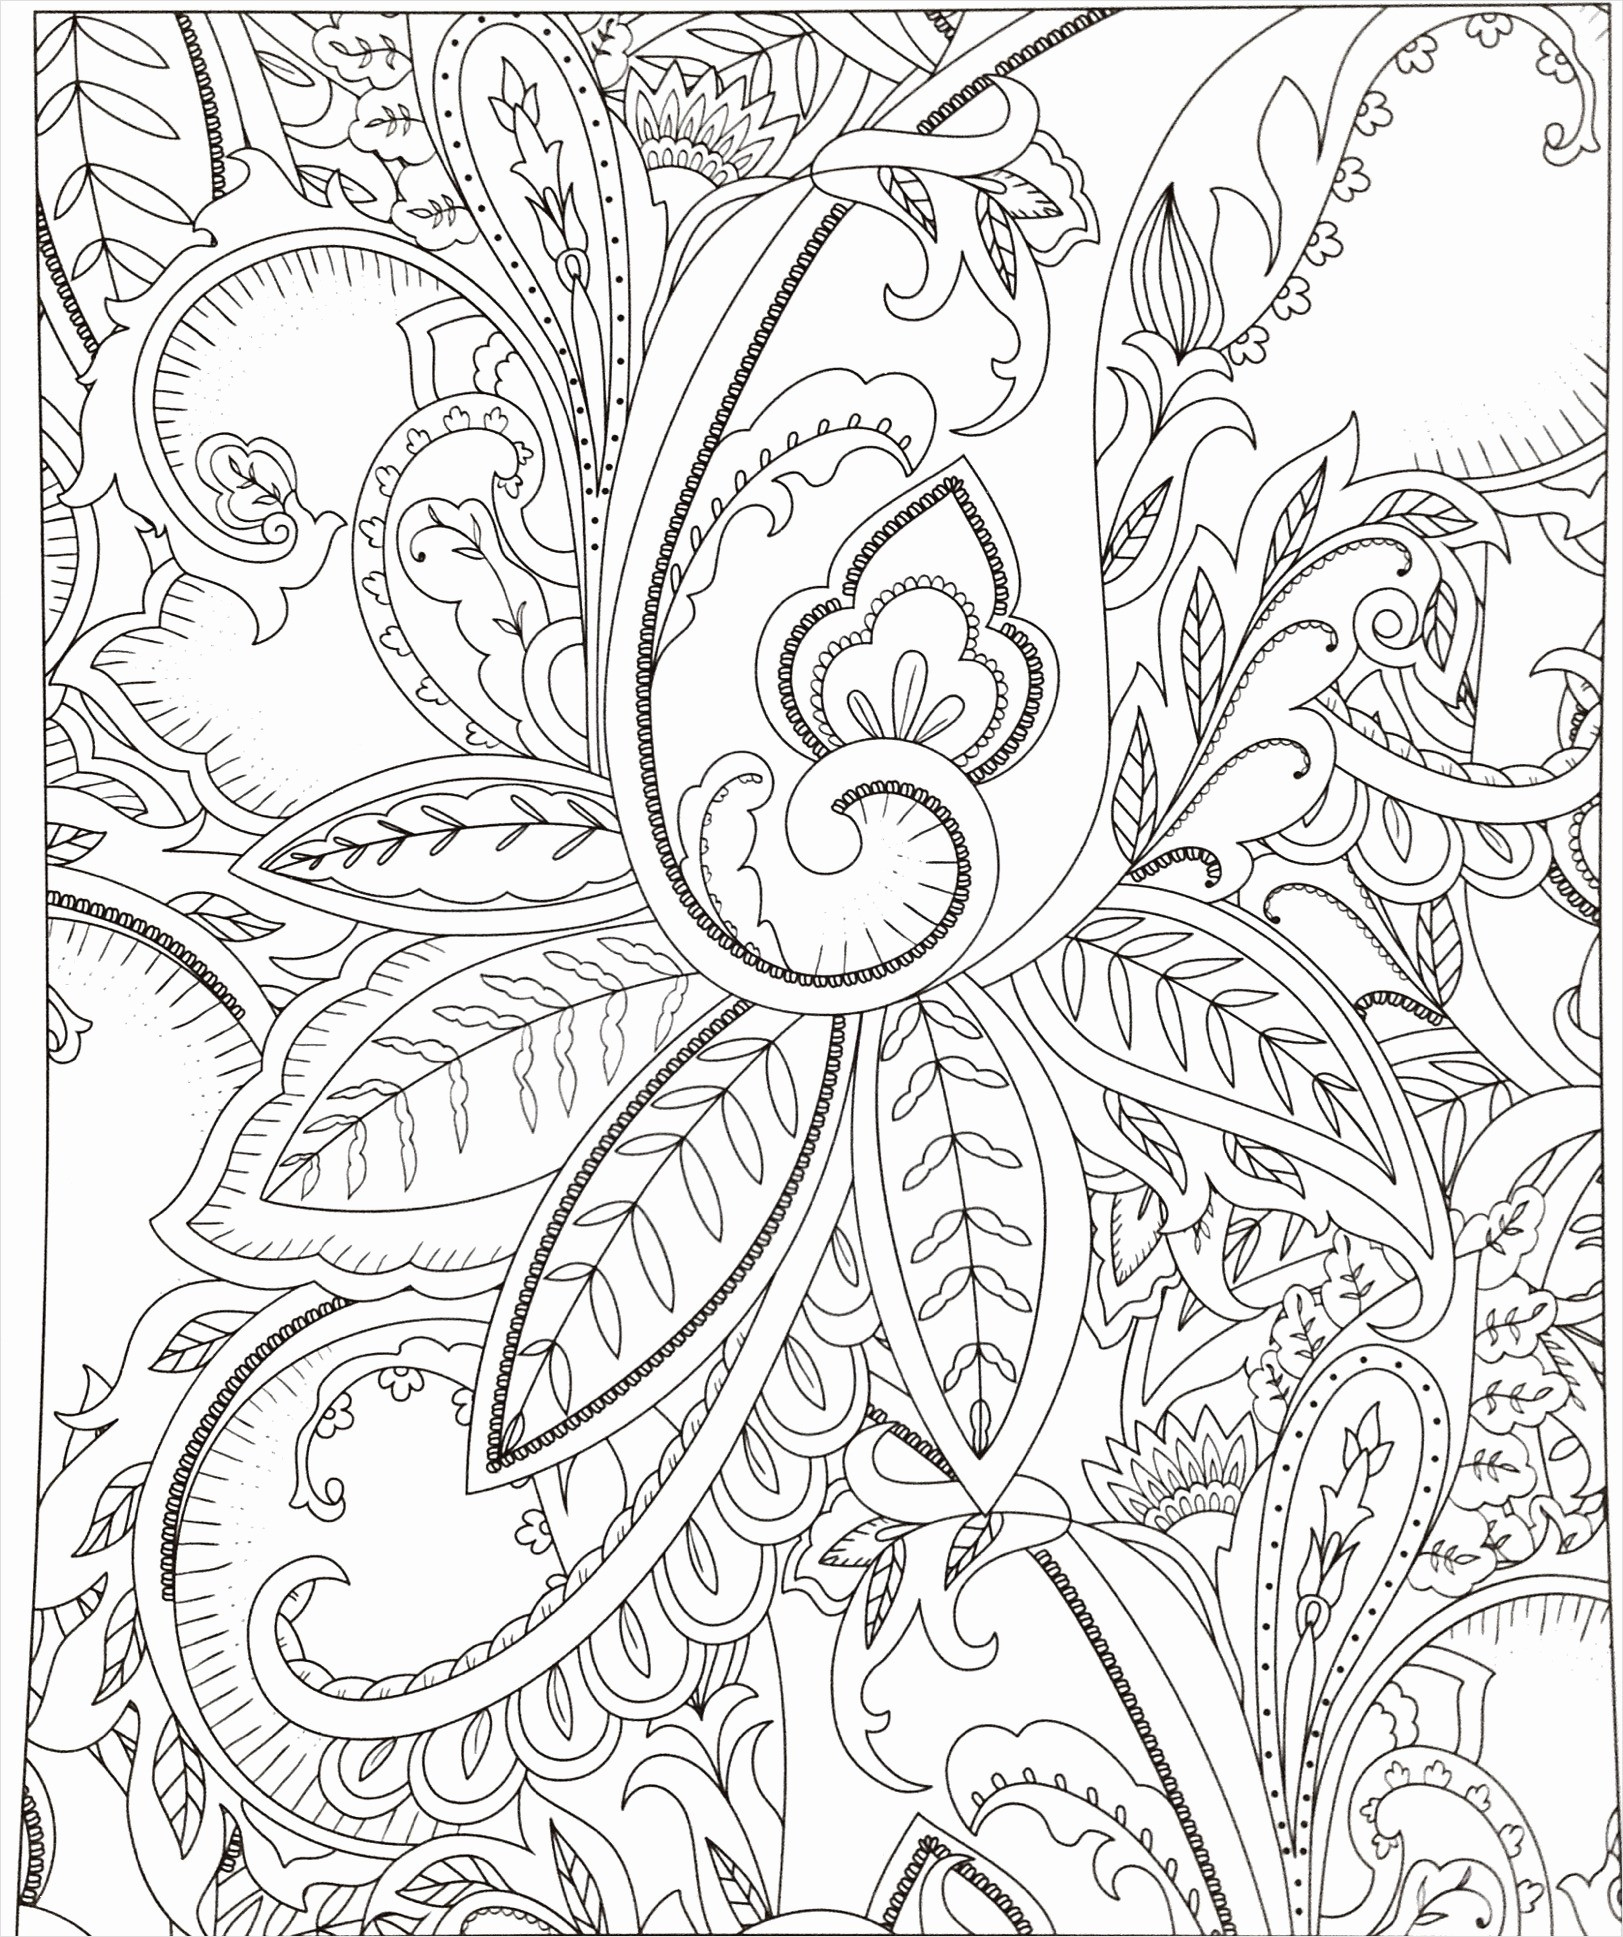 princess house flower vase of frog coloring pages awesome cool vases flower vase coloring page with printable princess coloring page heathermarxgallery of frog coloring pages awesome cool vases flower vase coloring page